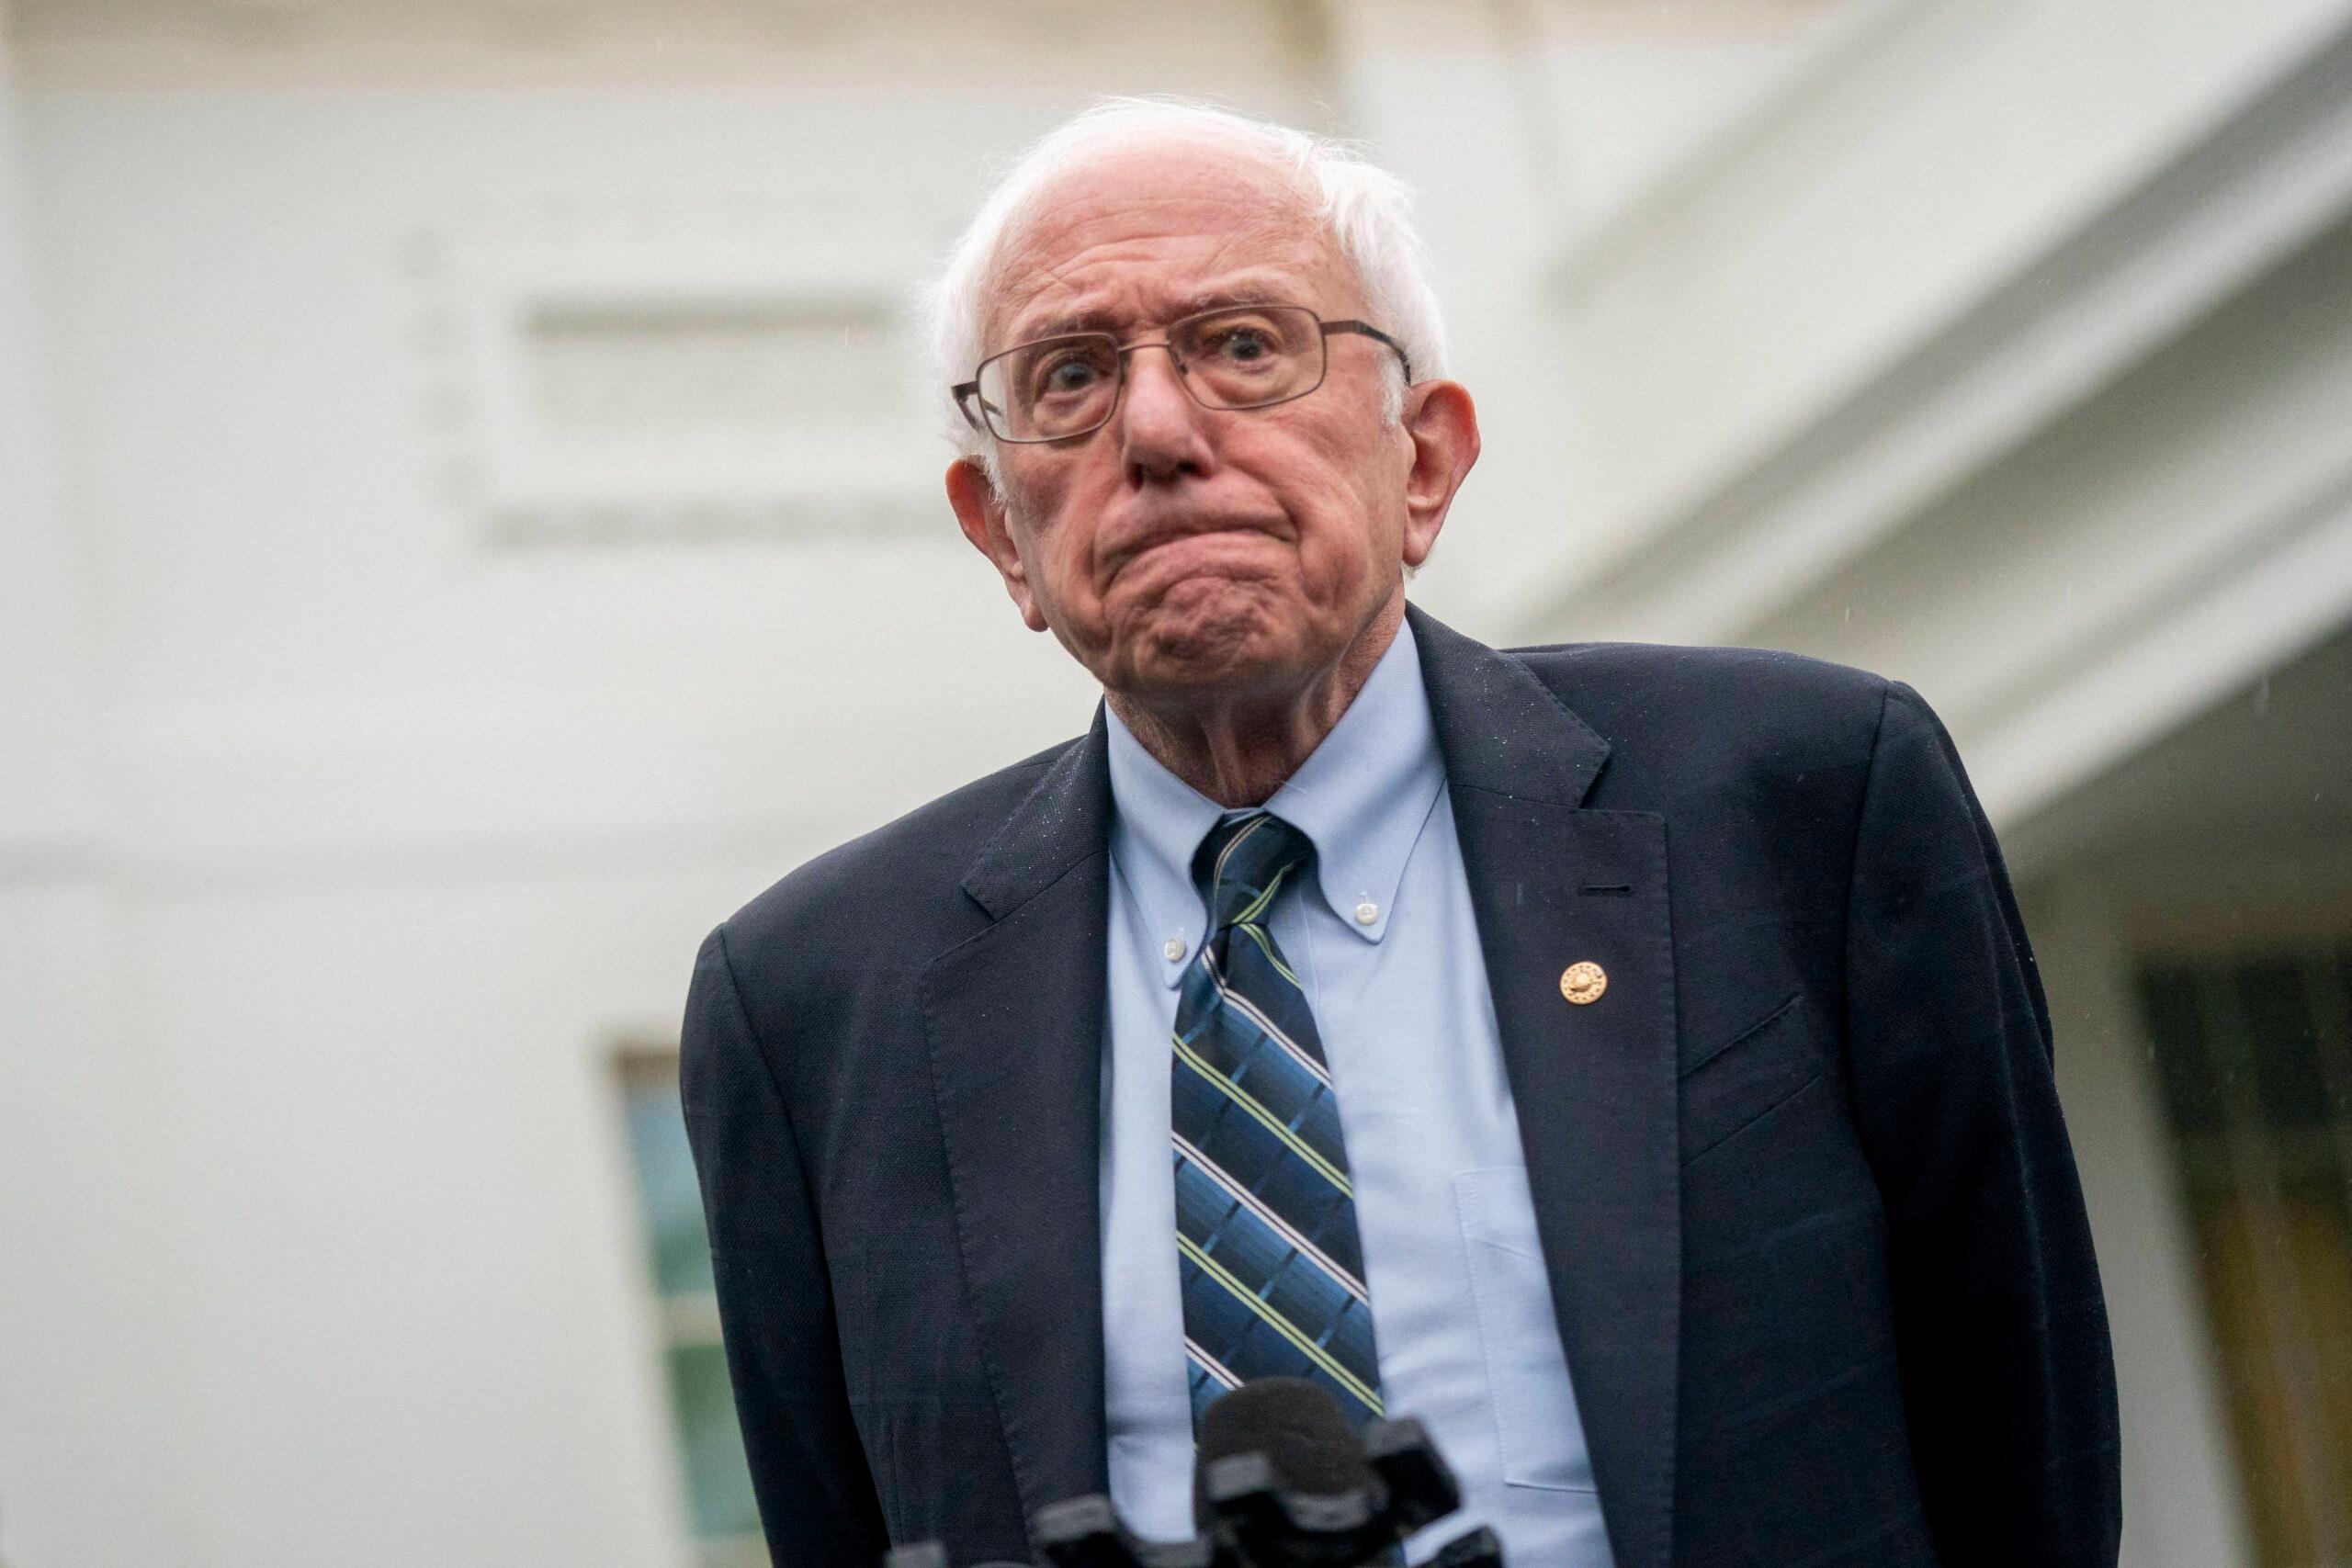 Police Release Photo Of Suspect In Arson Attack On Bernie Sanders' Office